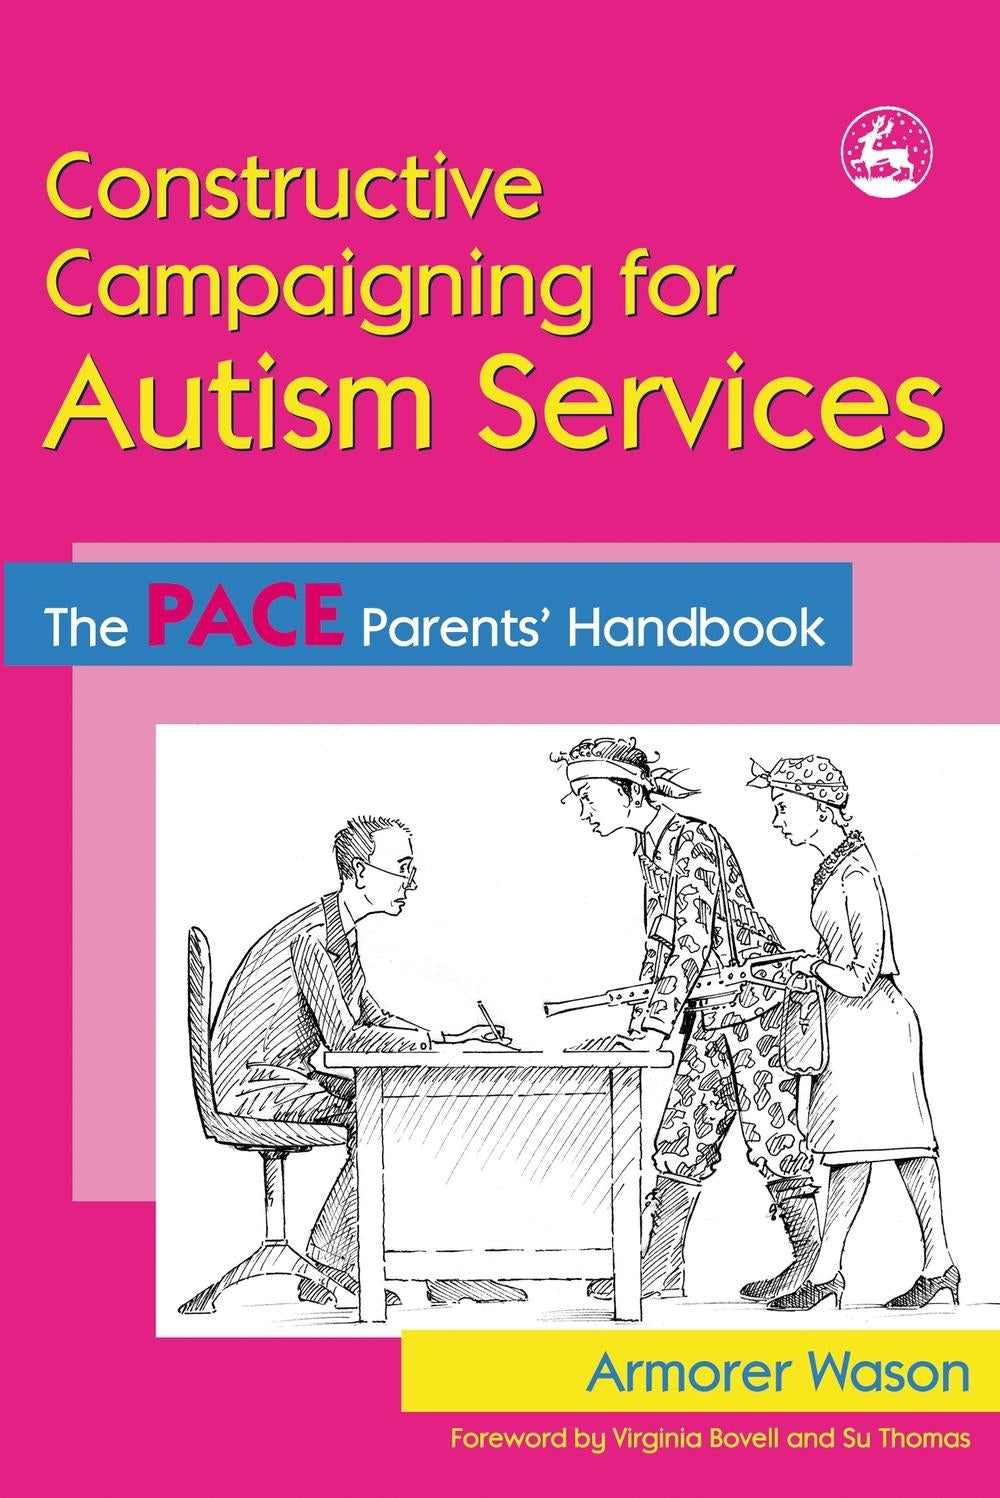 Constructive Campaigning for Autism Services by Armorer Wason